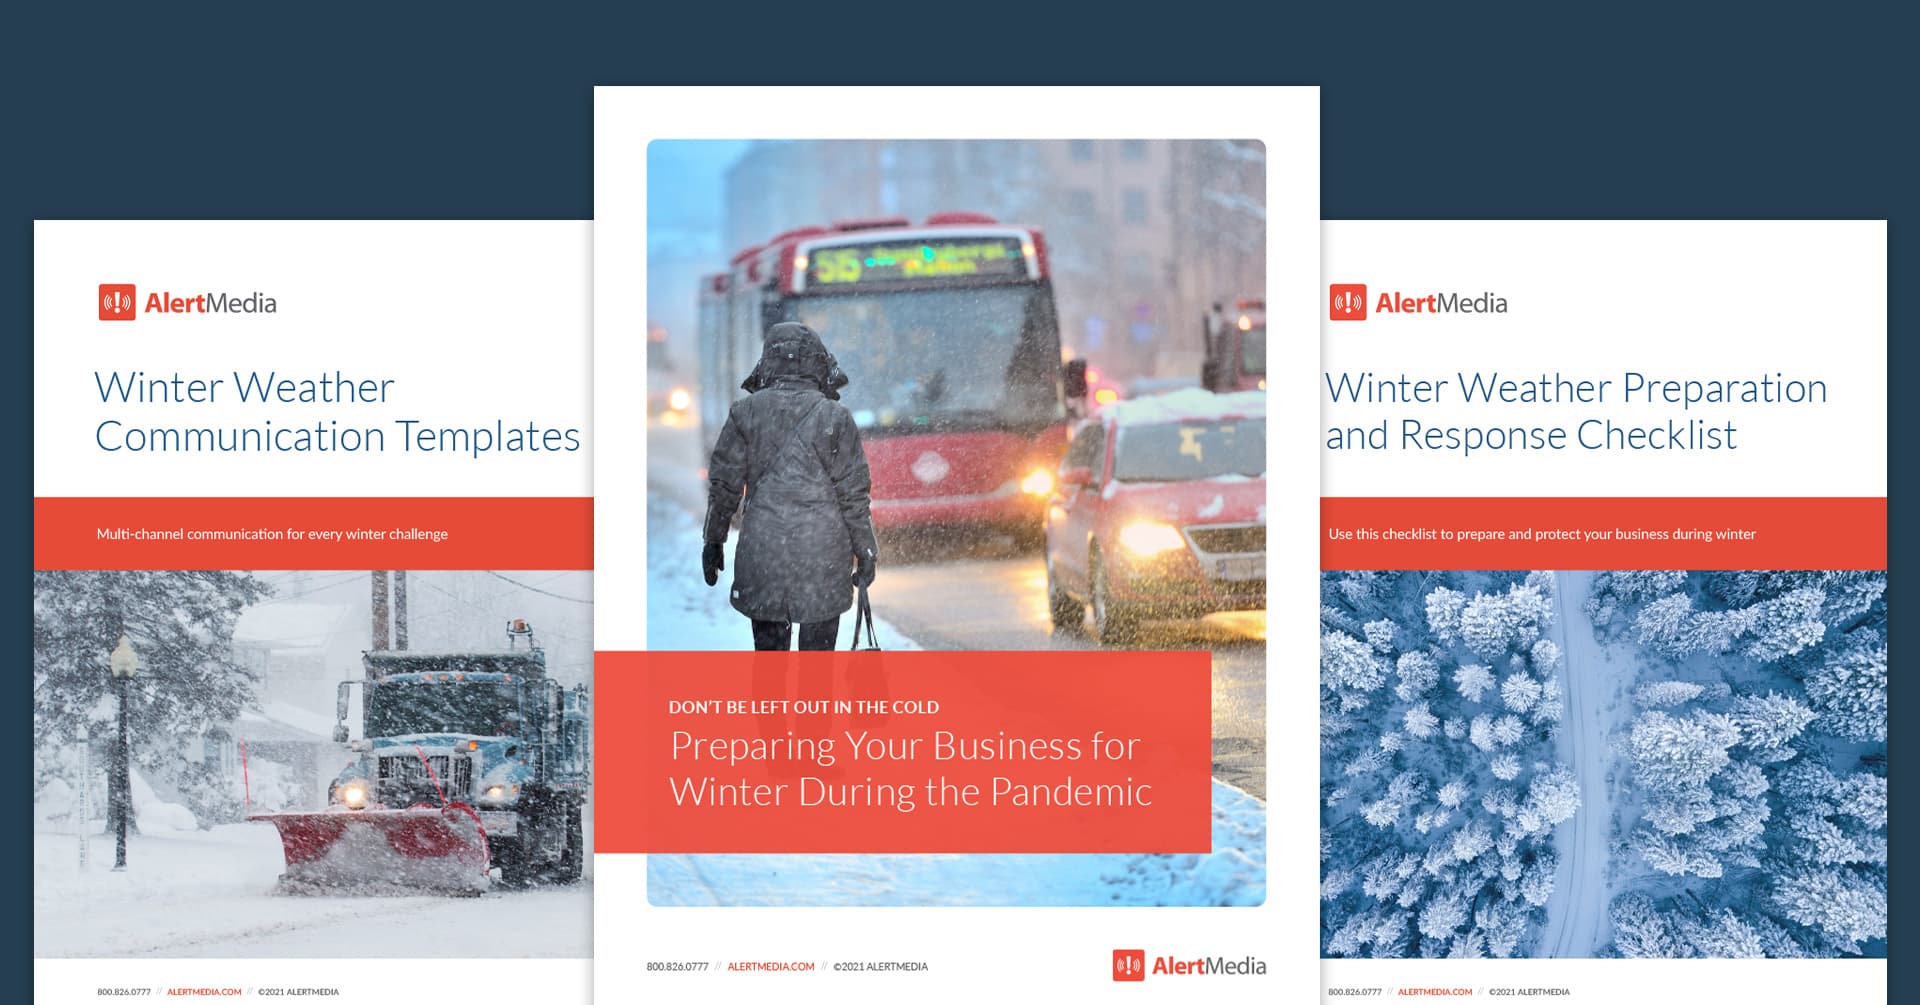 the covers of the three resources that make up AlertMedia's winter weather preparation kit